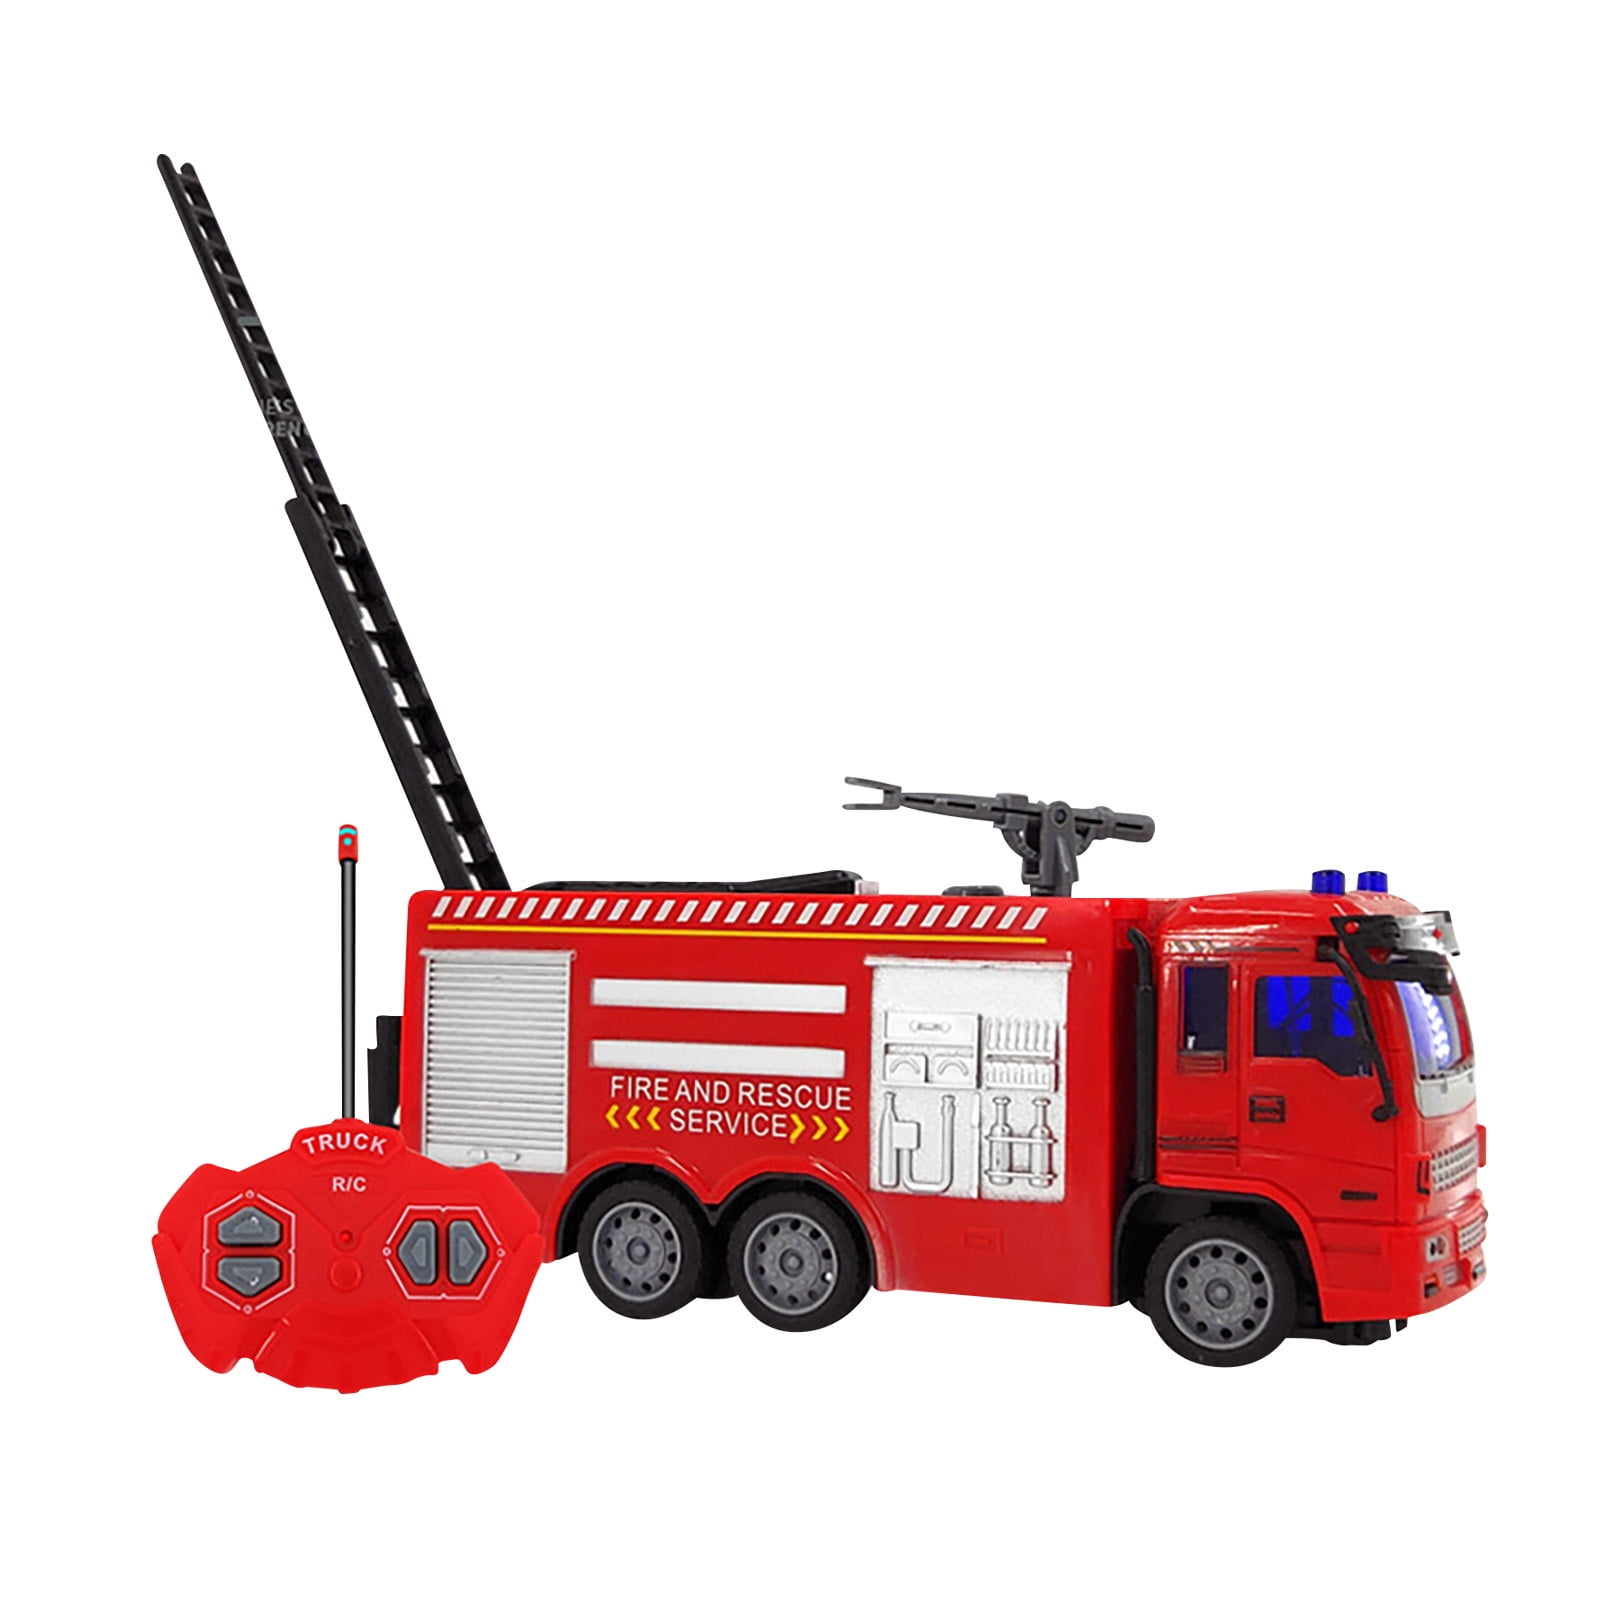 LARGE FIRE RESCUE FIRE ENGINE TRUCK Extendable ladder Remote Control Car  30CM 